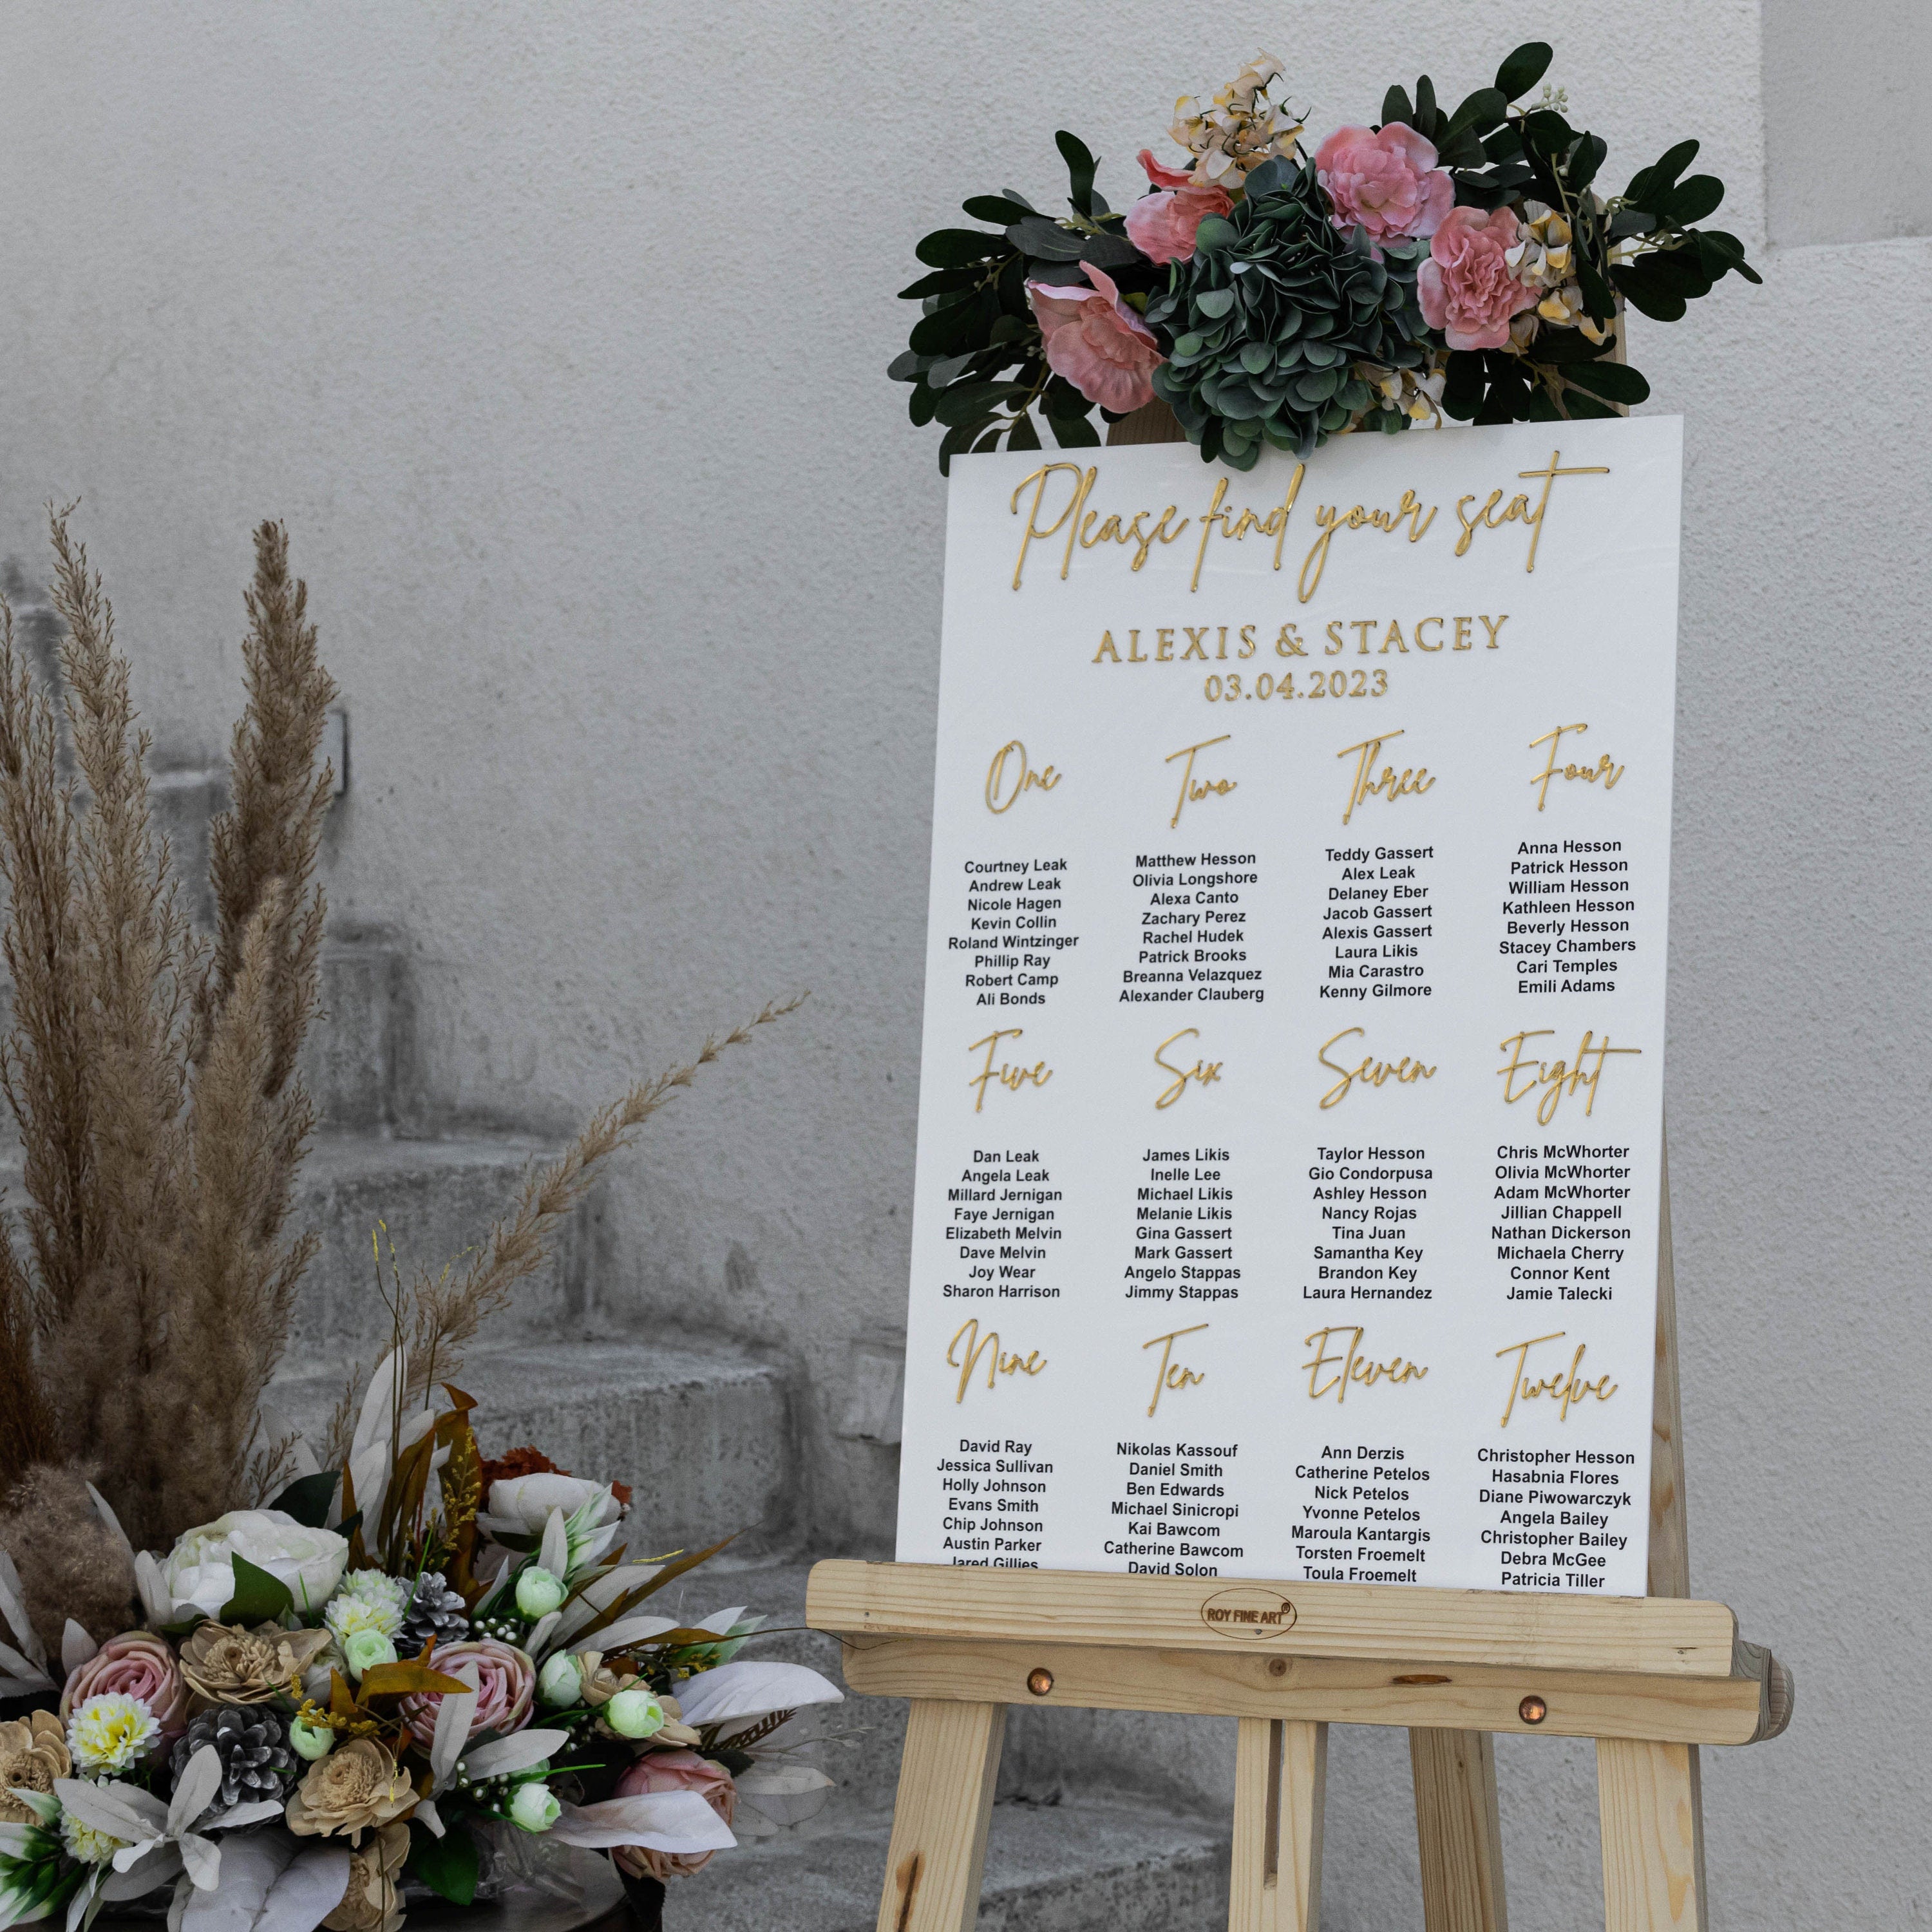 White Acrylic Seating Chart, Wedding seating chart, wedding seating sign, Please Be Seated Wedding Sign, Wedding Guests Plan